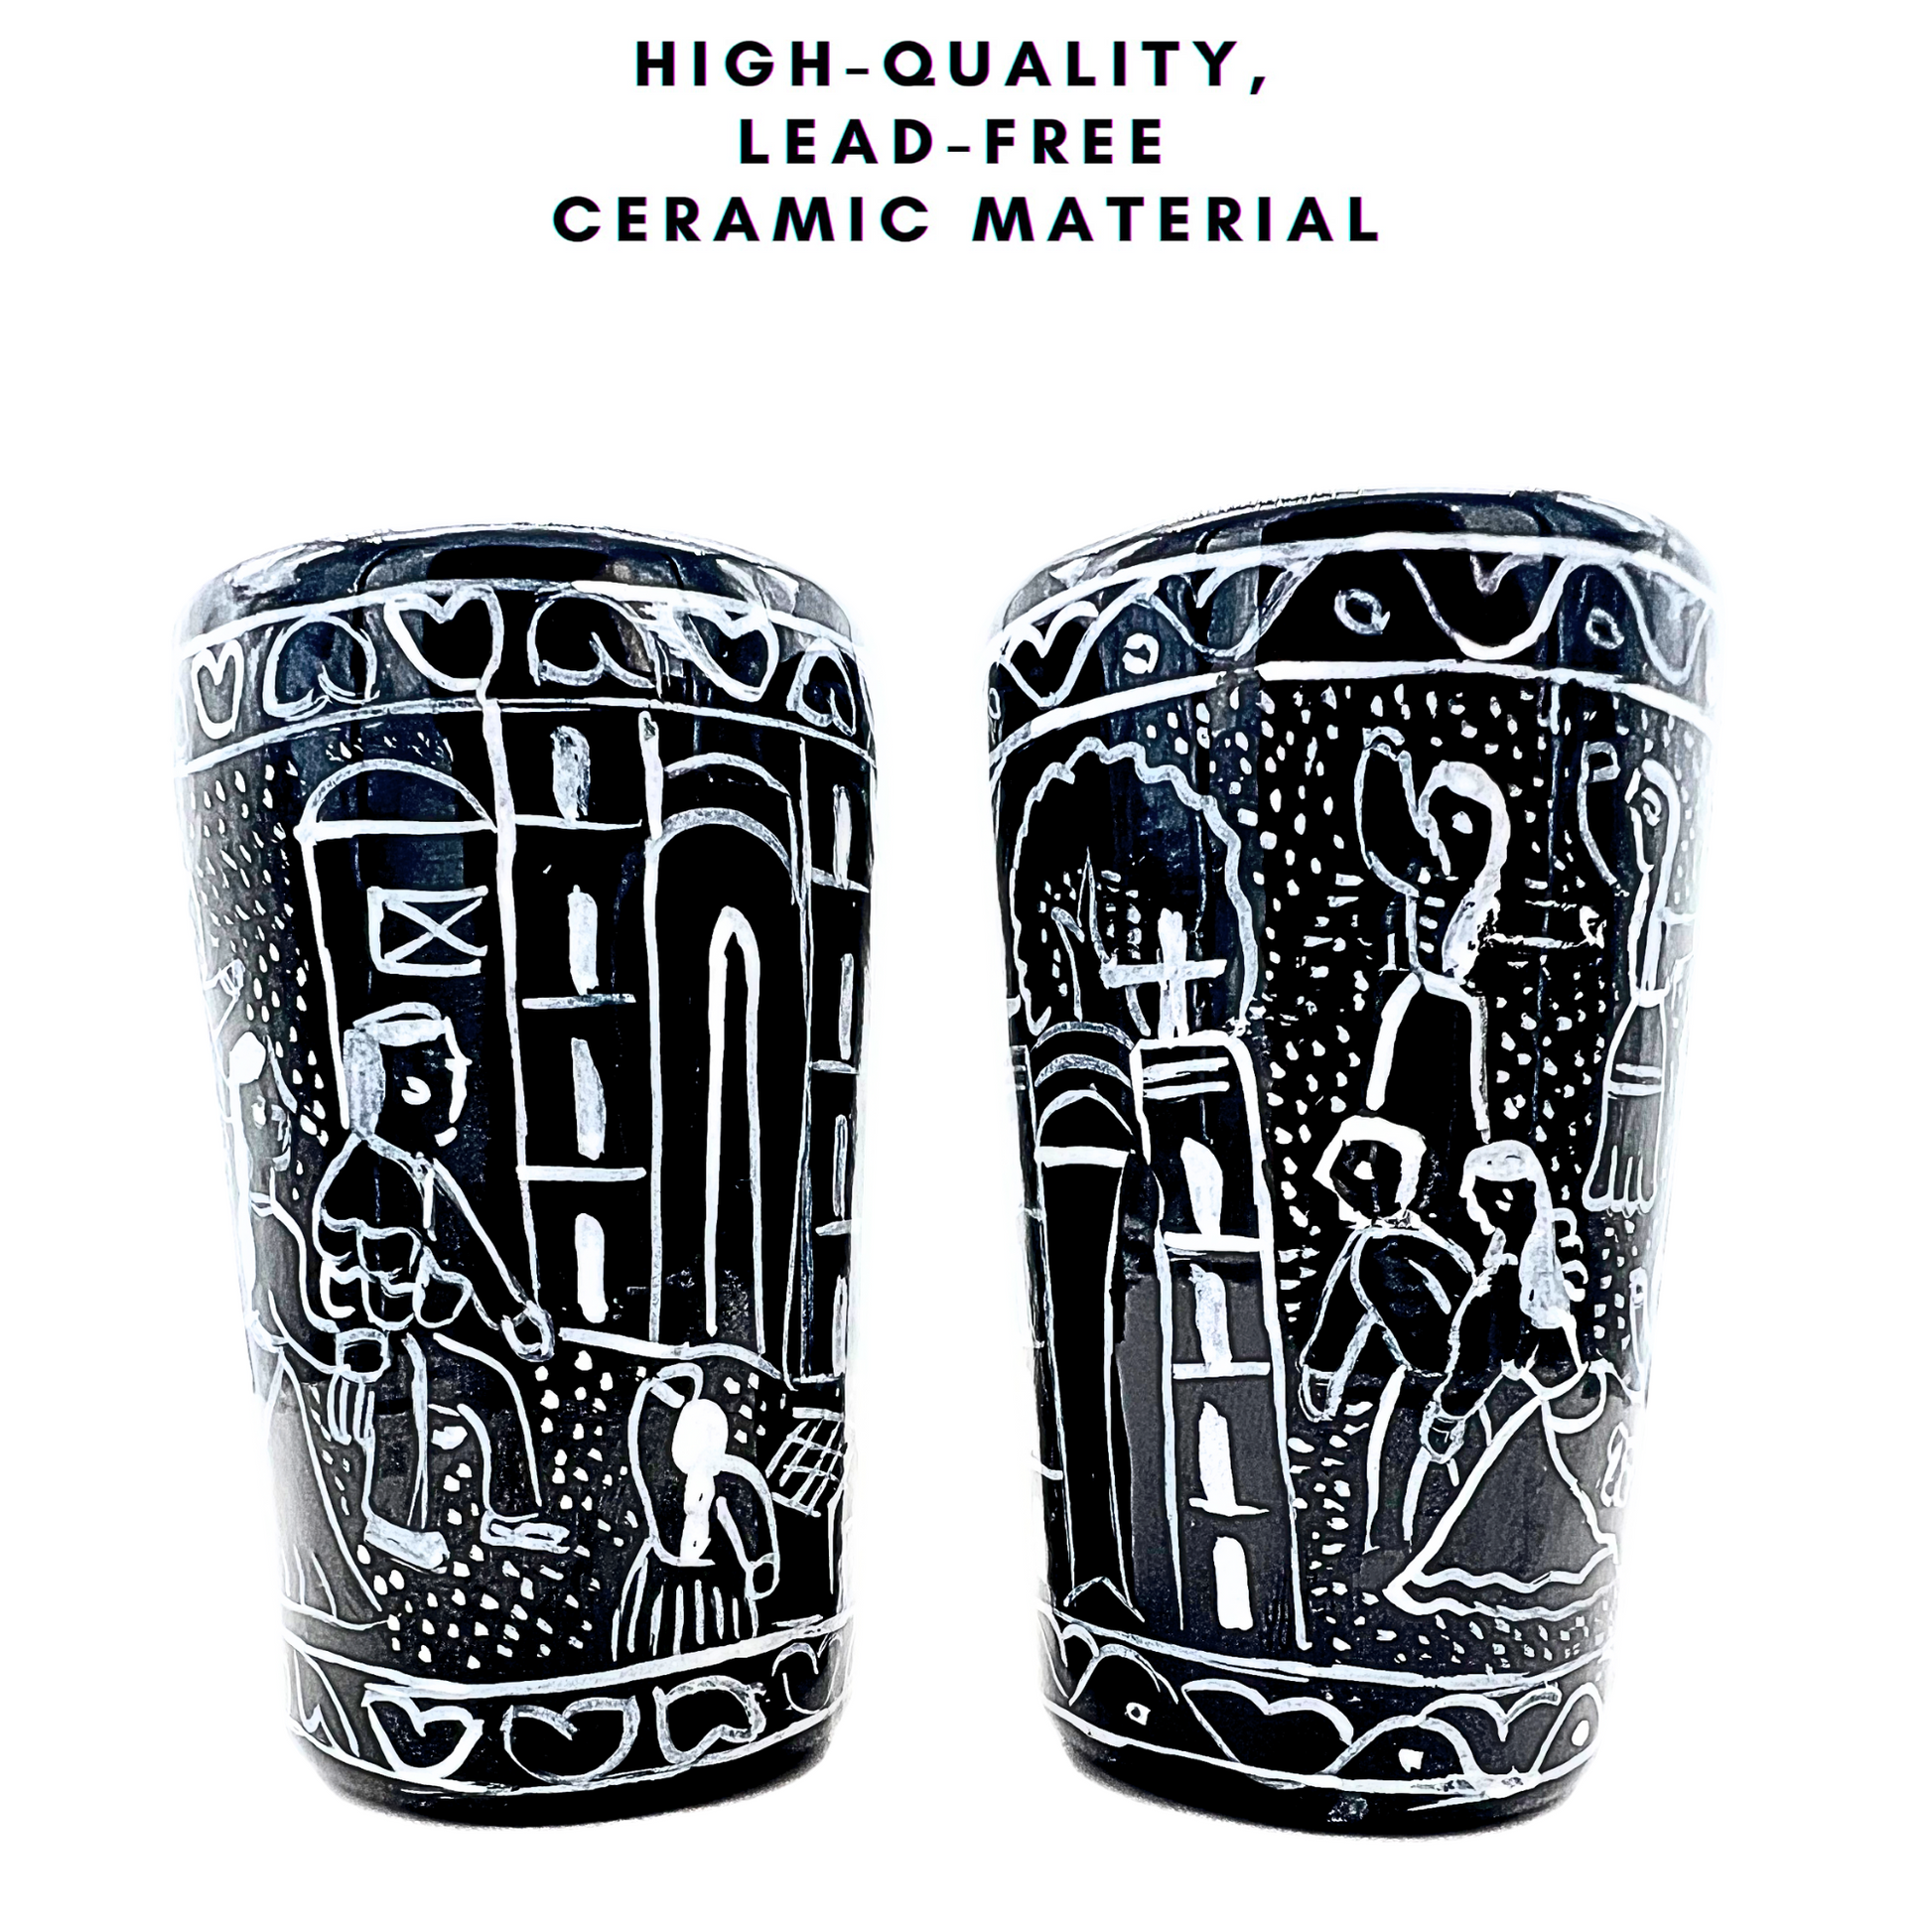 Black ceramic shot glasses, individually hand-painted in Mexico, ideal for tequila, mezcal, or other spirits, pack of 2.